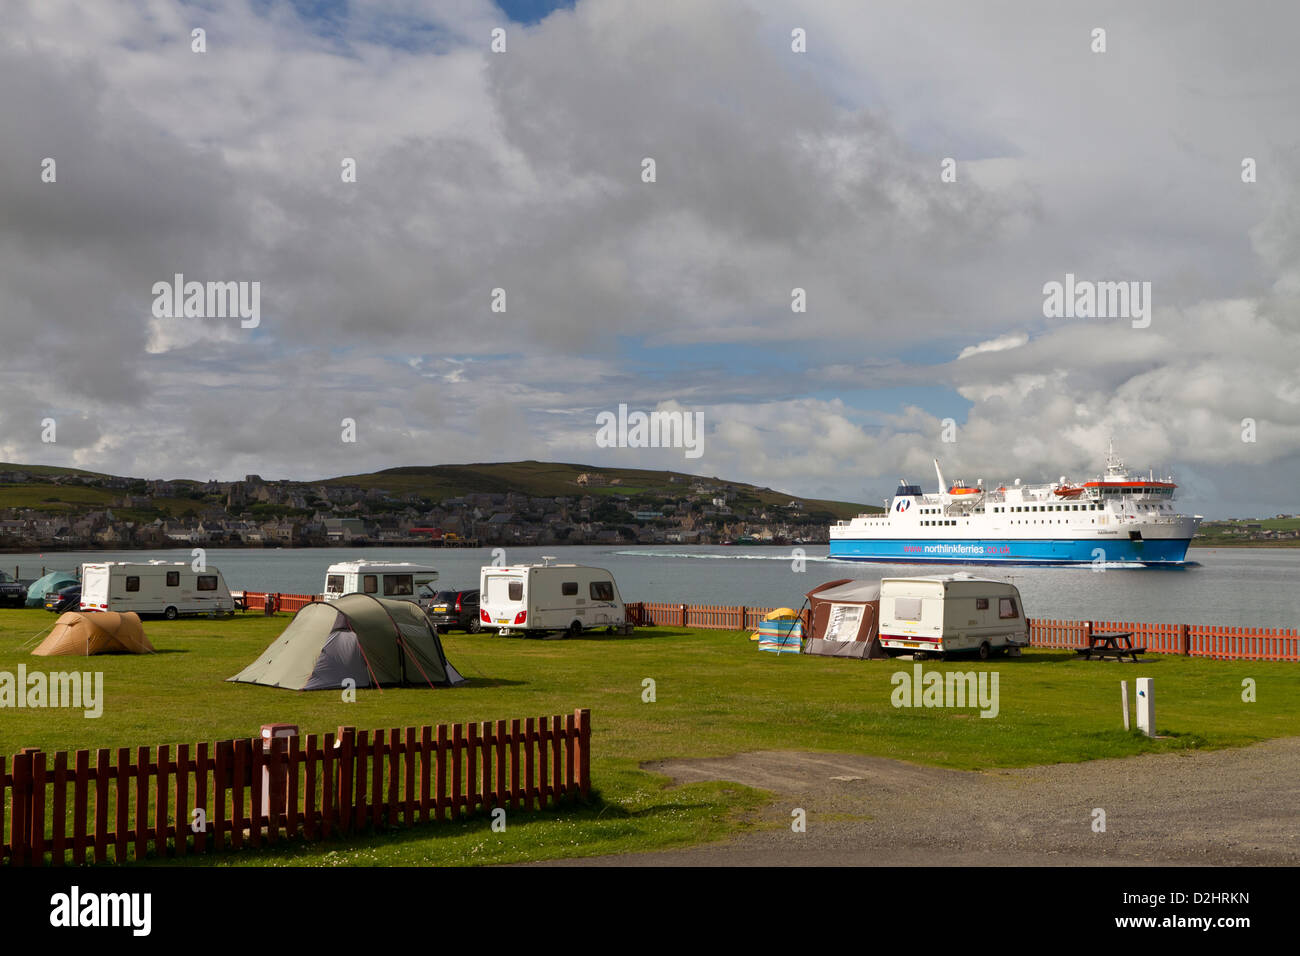 Camping and caravanning in Orkney Stock Photo